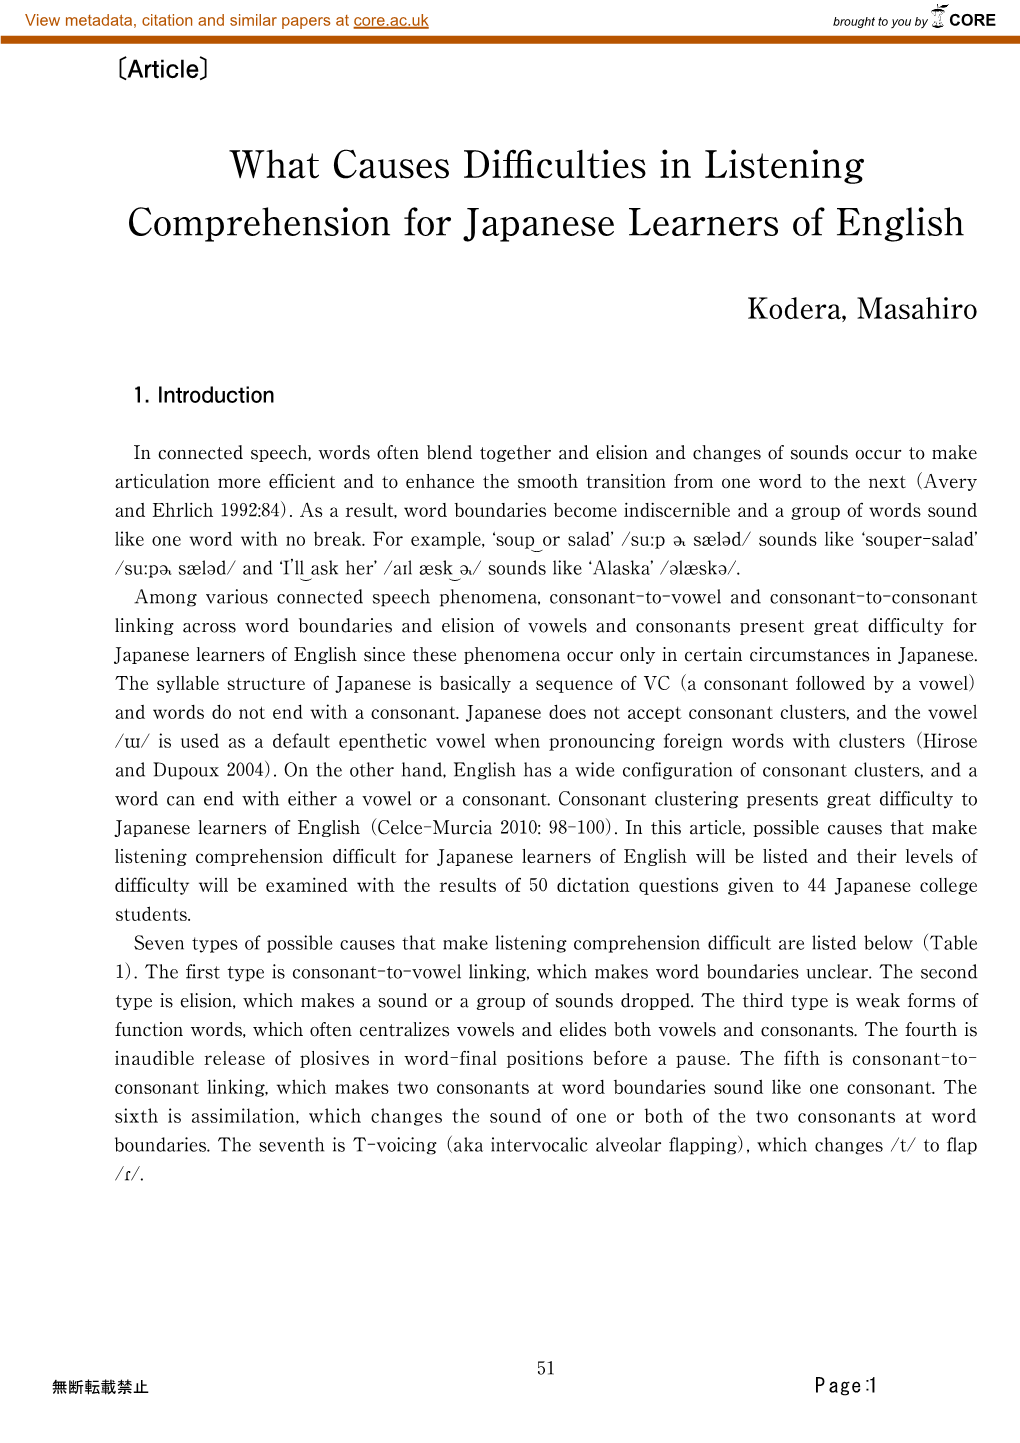 What Causes Difficulties in Listening Comprehension for Japanese Learners of English